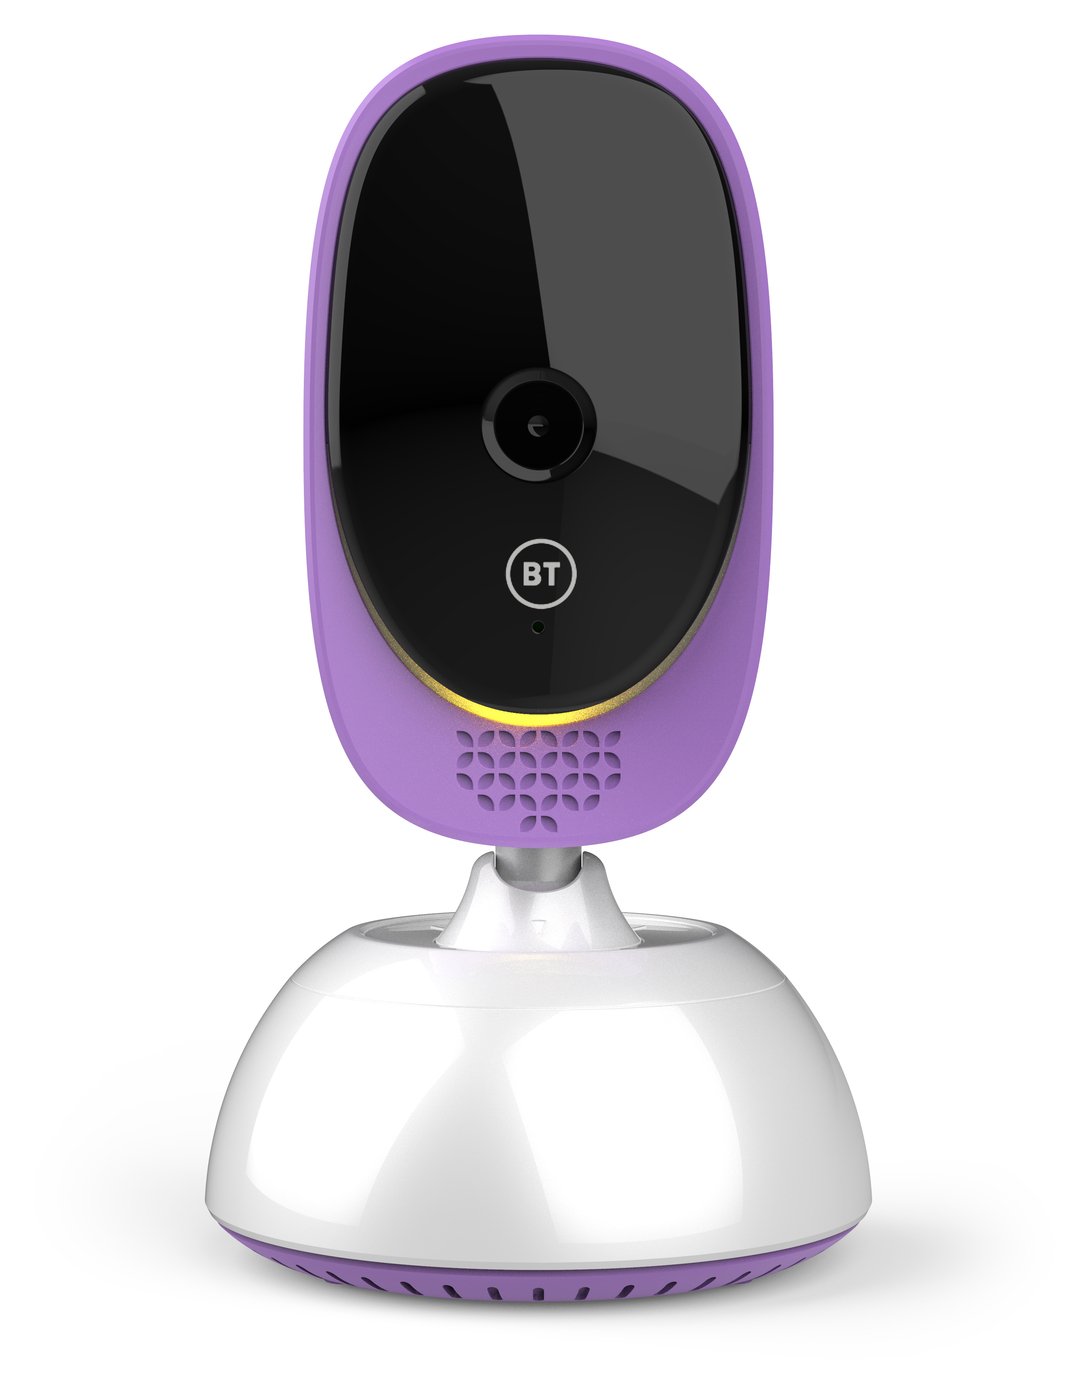 BT Video 5000 Baby Monitor Review